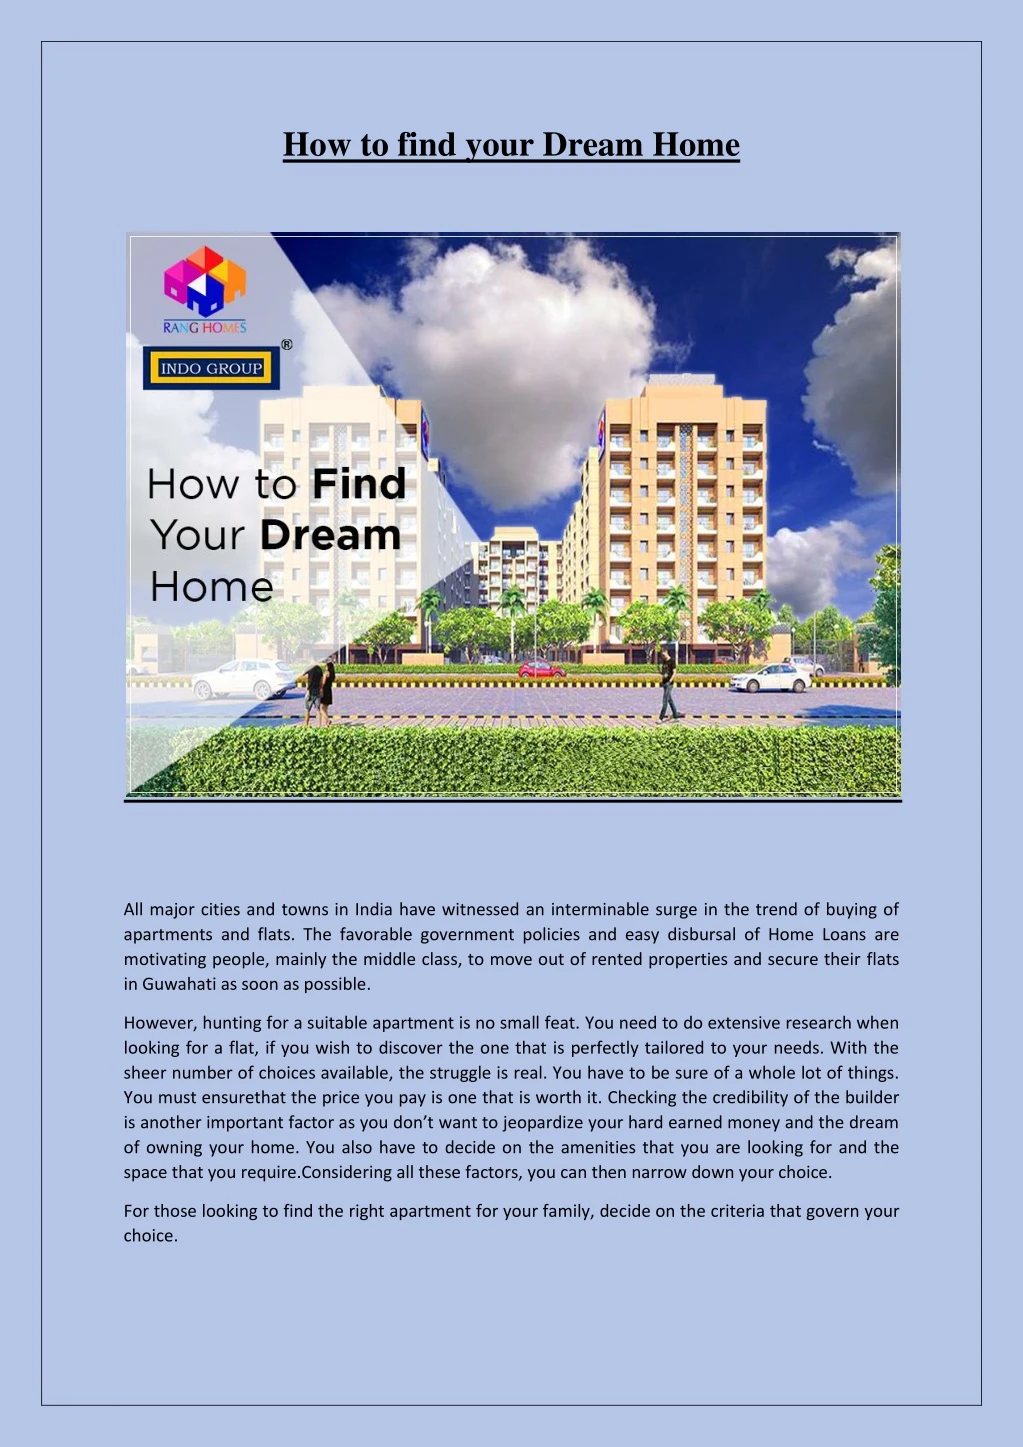 how to find your dream home